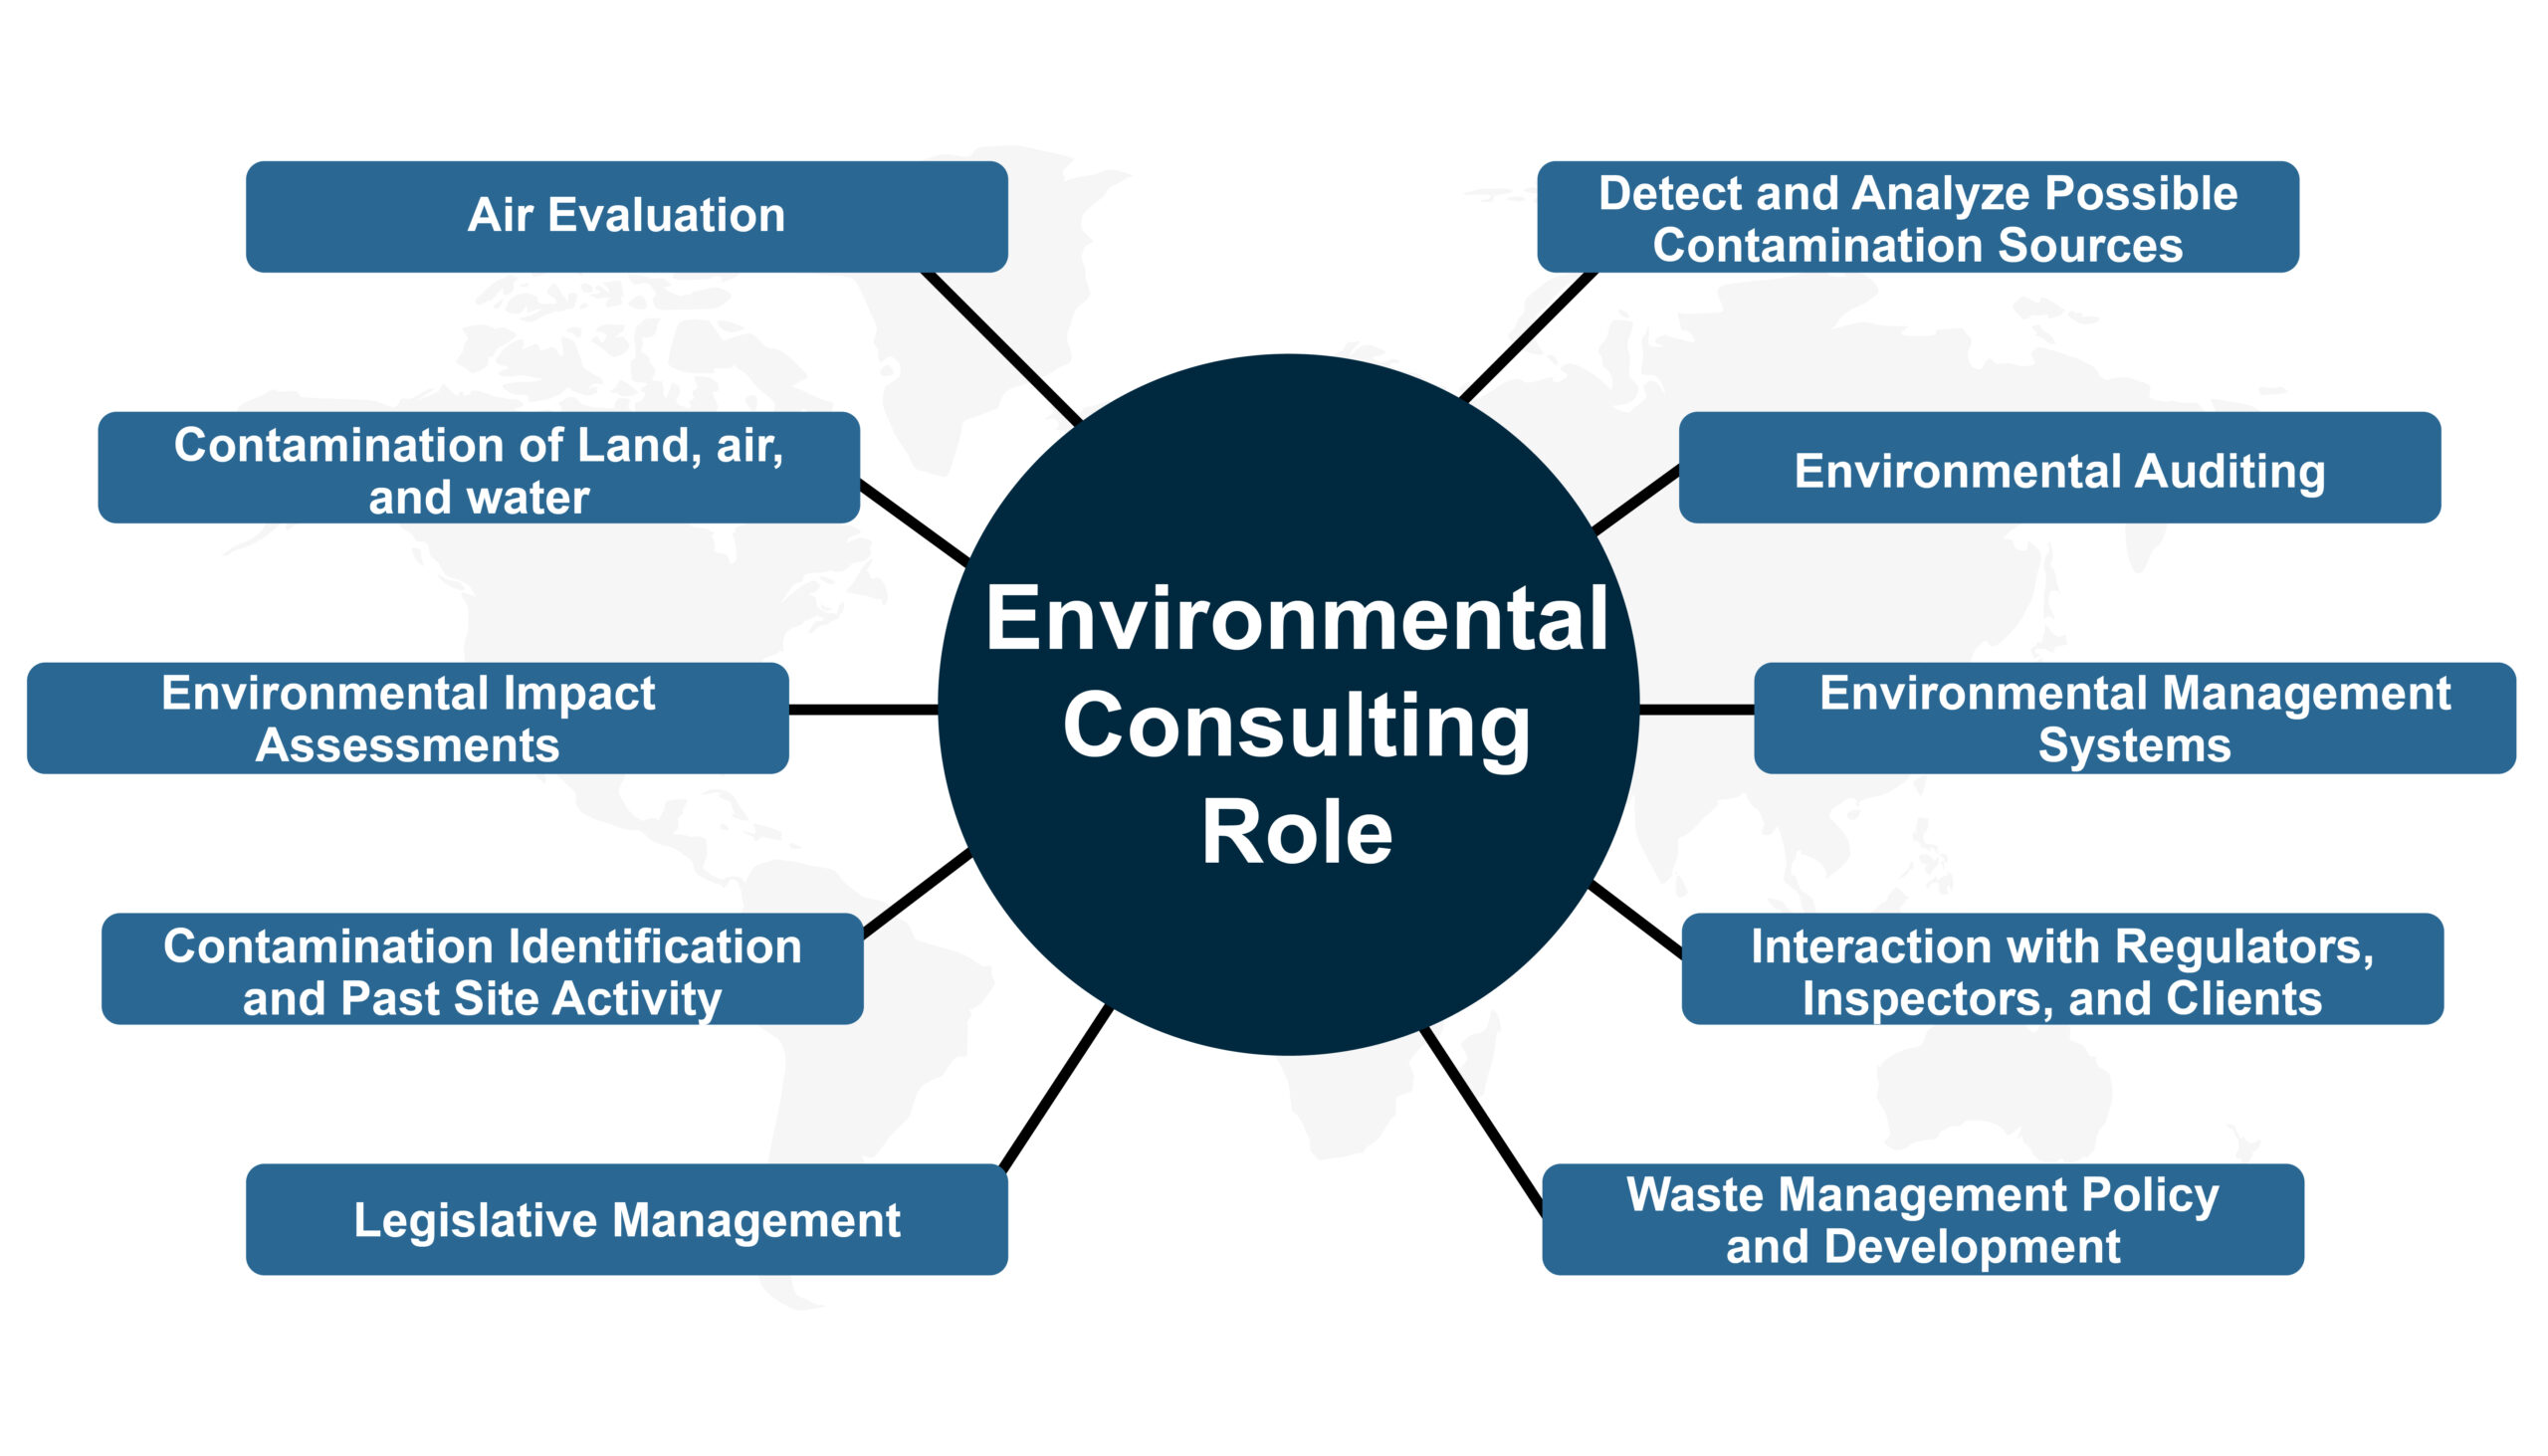 Figure 4. The Role of Environmental Consulting